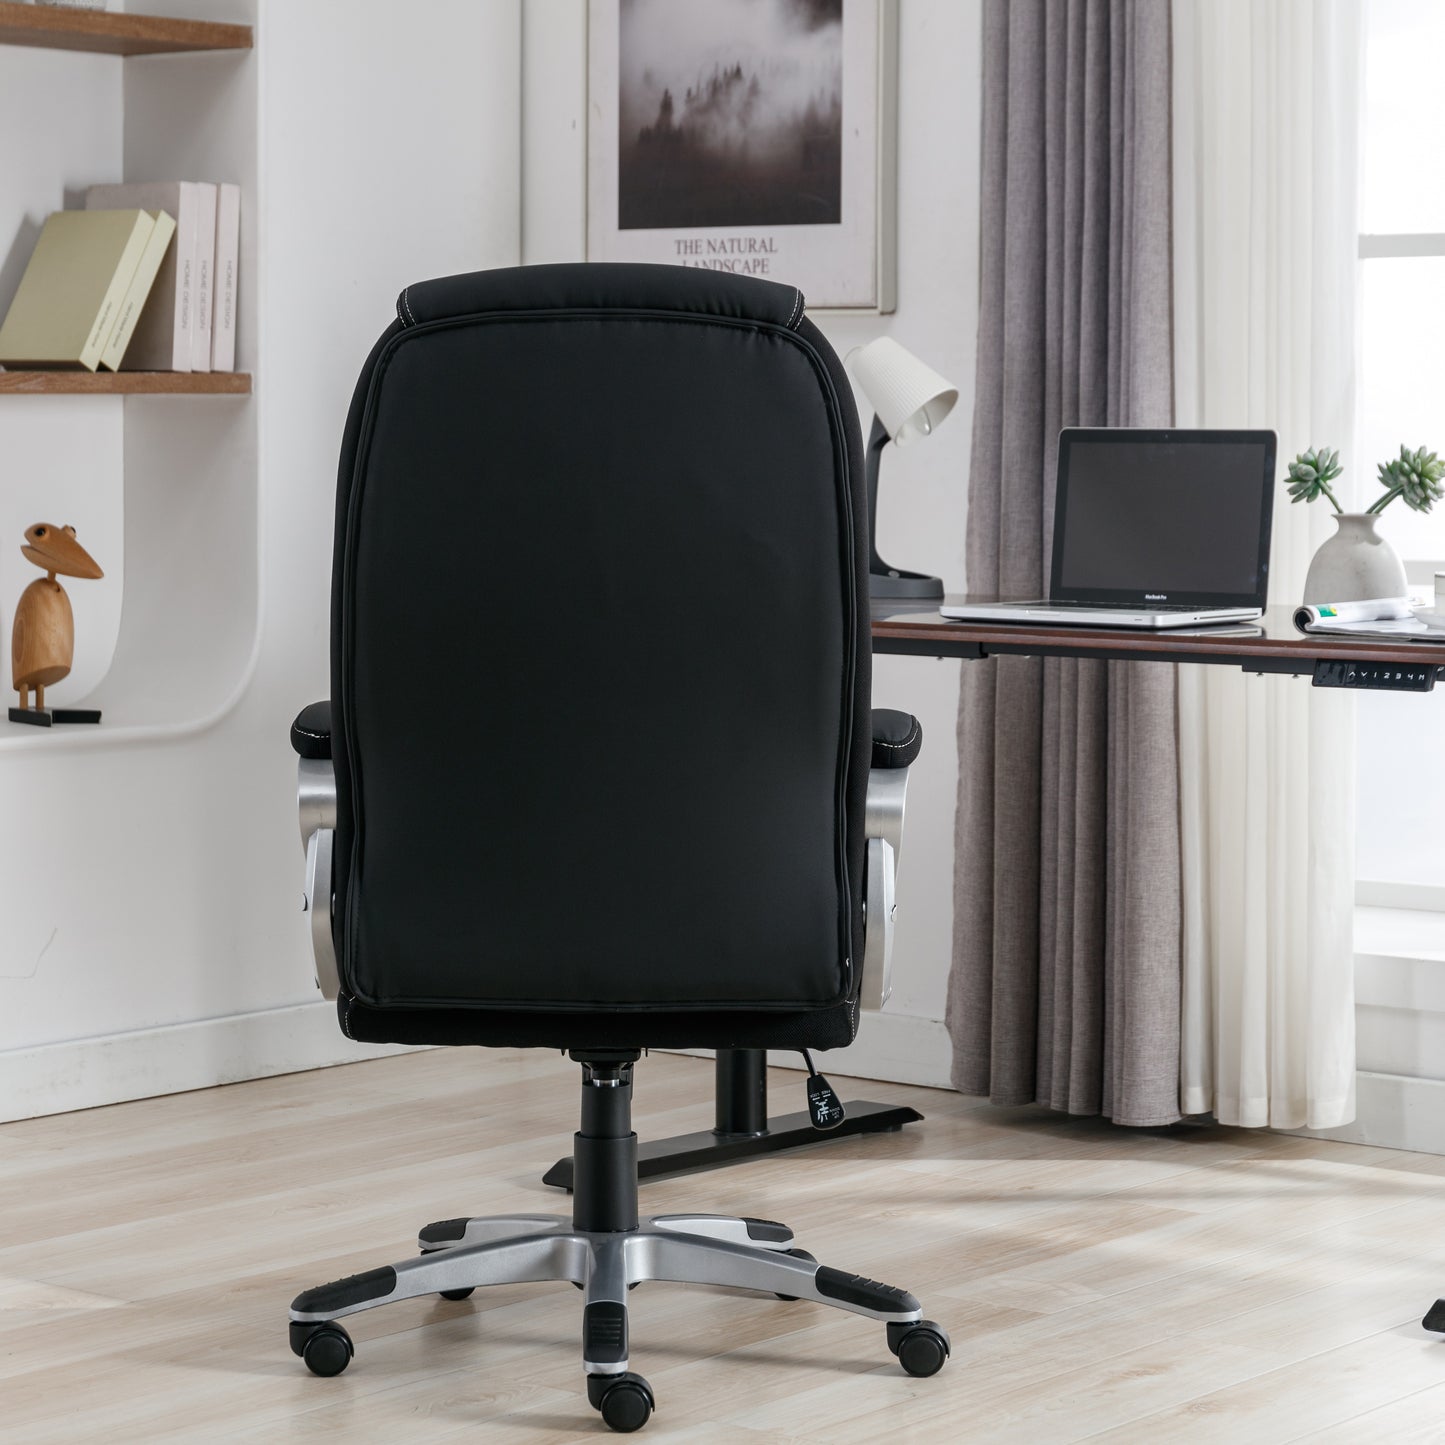 Tauris Legacy Ergonomic, Office Chair, Padded Arms Black